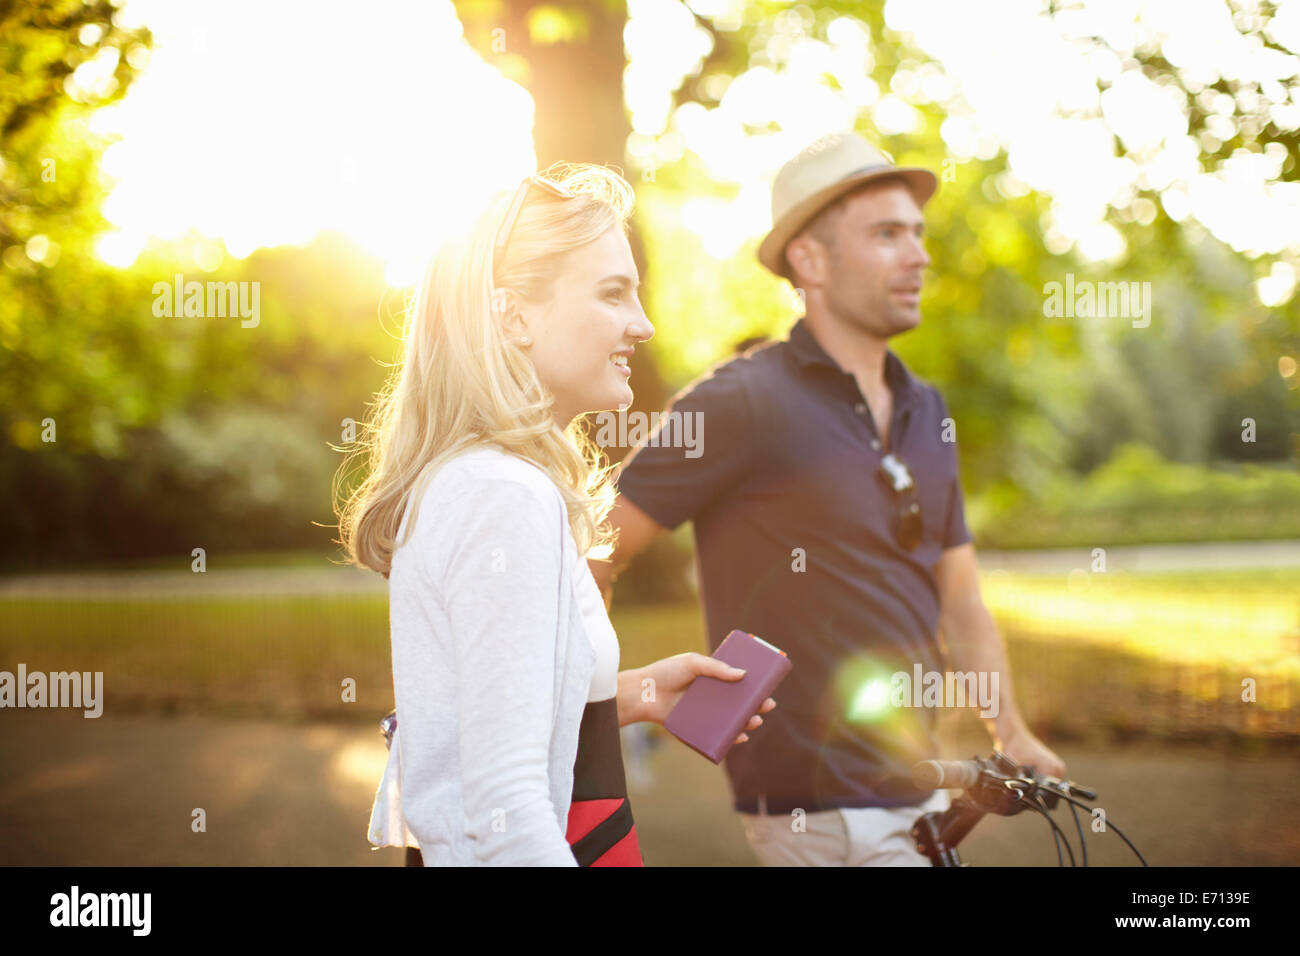 Couple with bicycle strolling in sunlit park Stock Photo